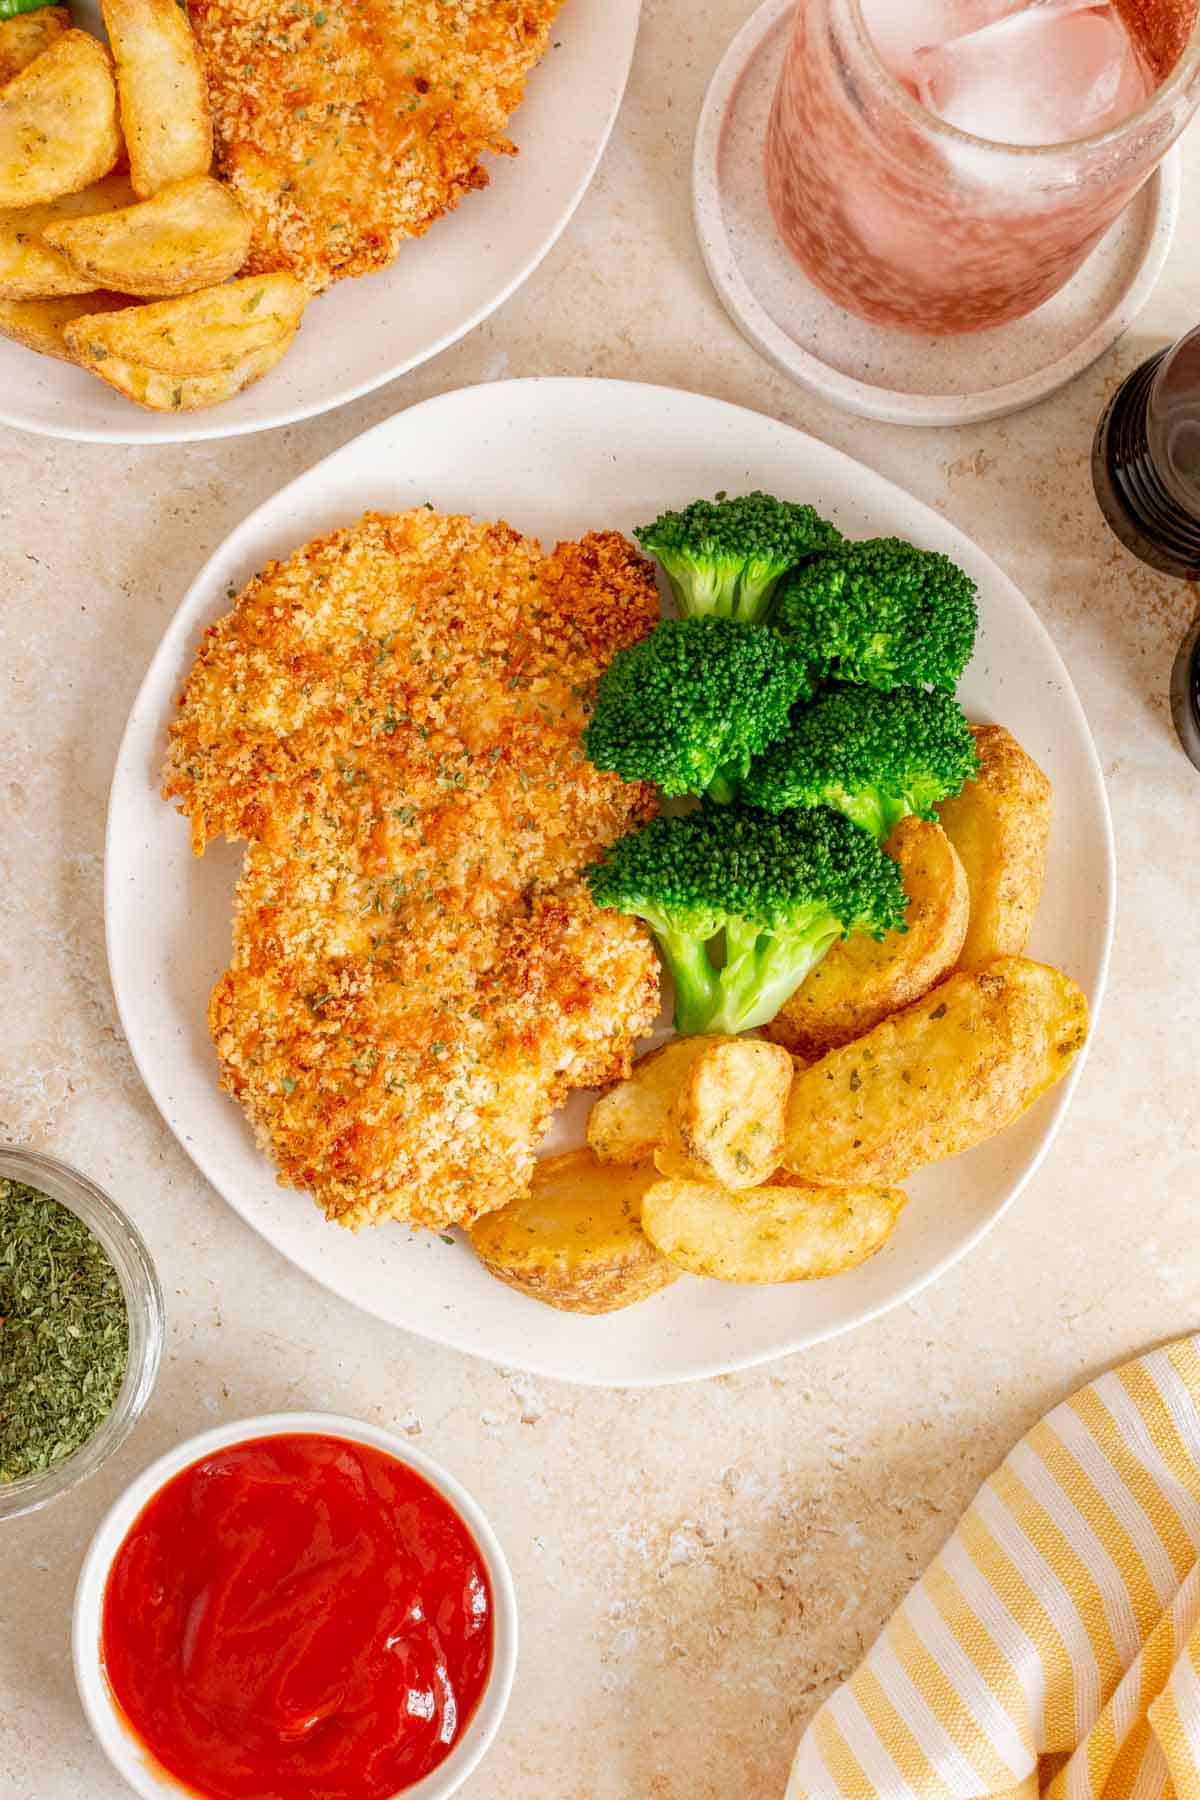 An overhead view of a plate with a baked chicken cutlet along with broccoli and potato wedges. Another plate, a drink, and dip off to the side.